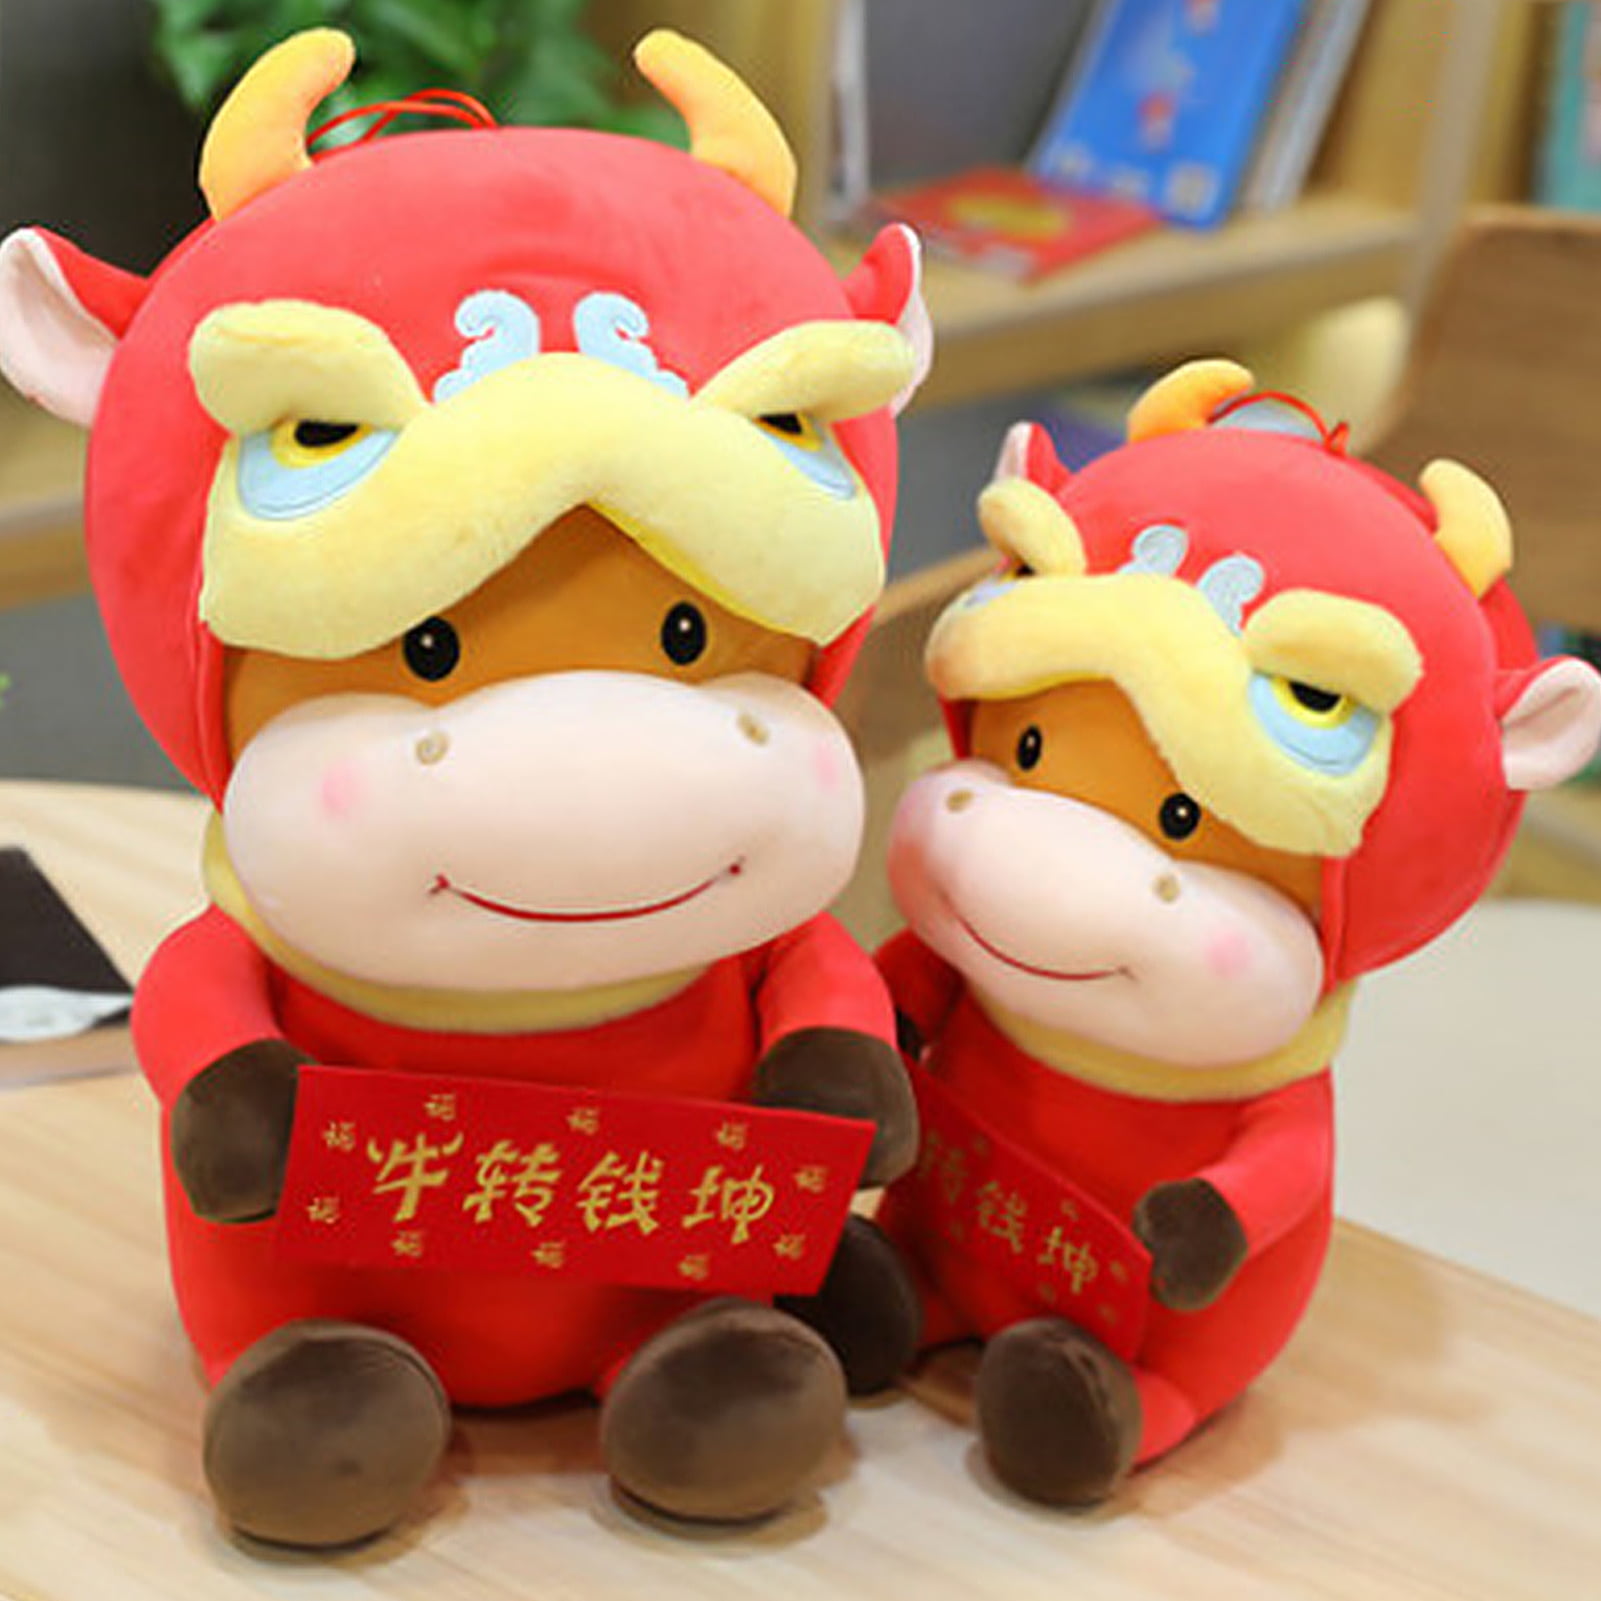 Lubelski Lion Dance Cartoon Cow Stuffed Doll Chinese New Year Gift Home Toy  Party Prop | Walmart Canada